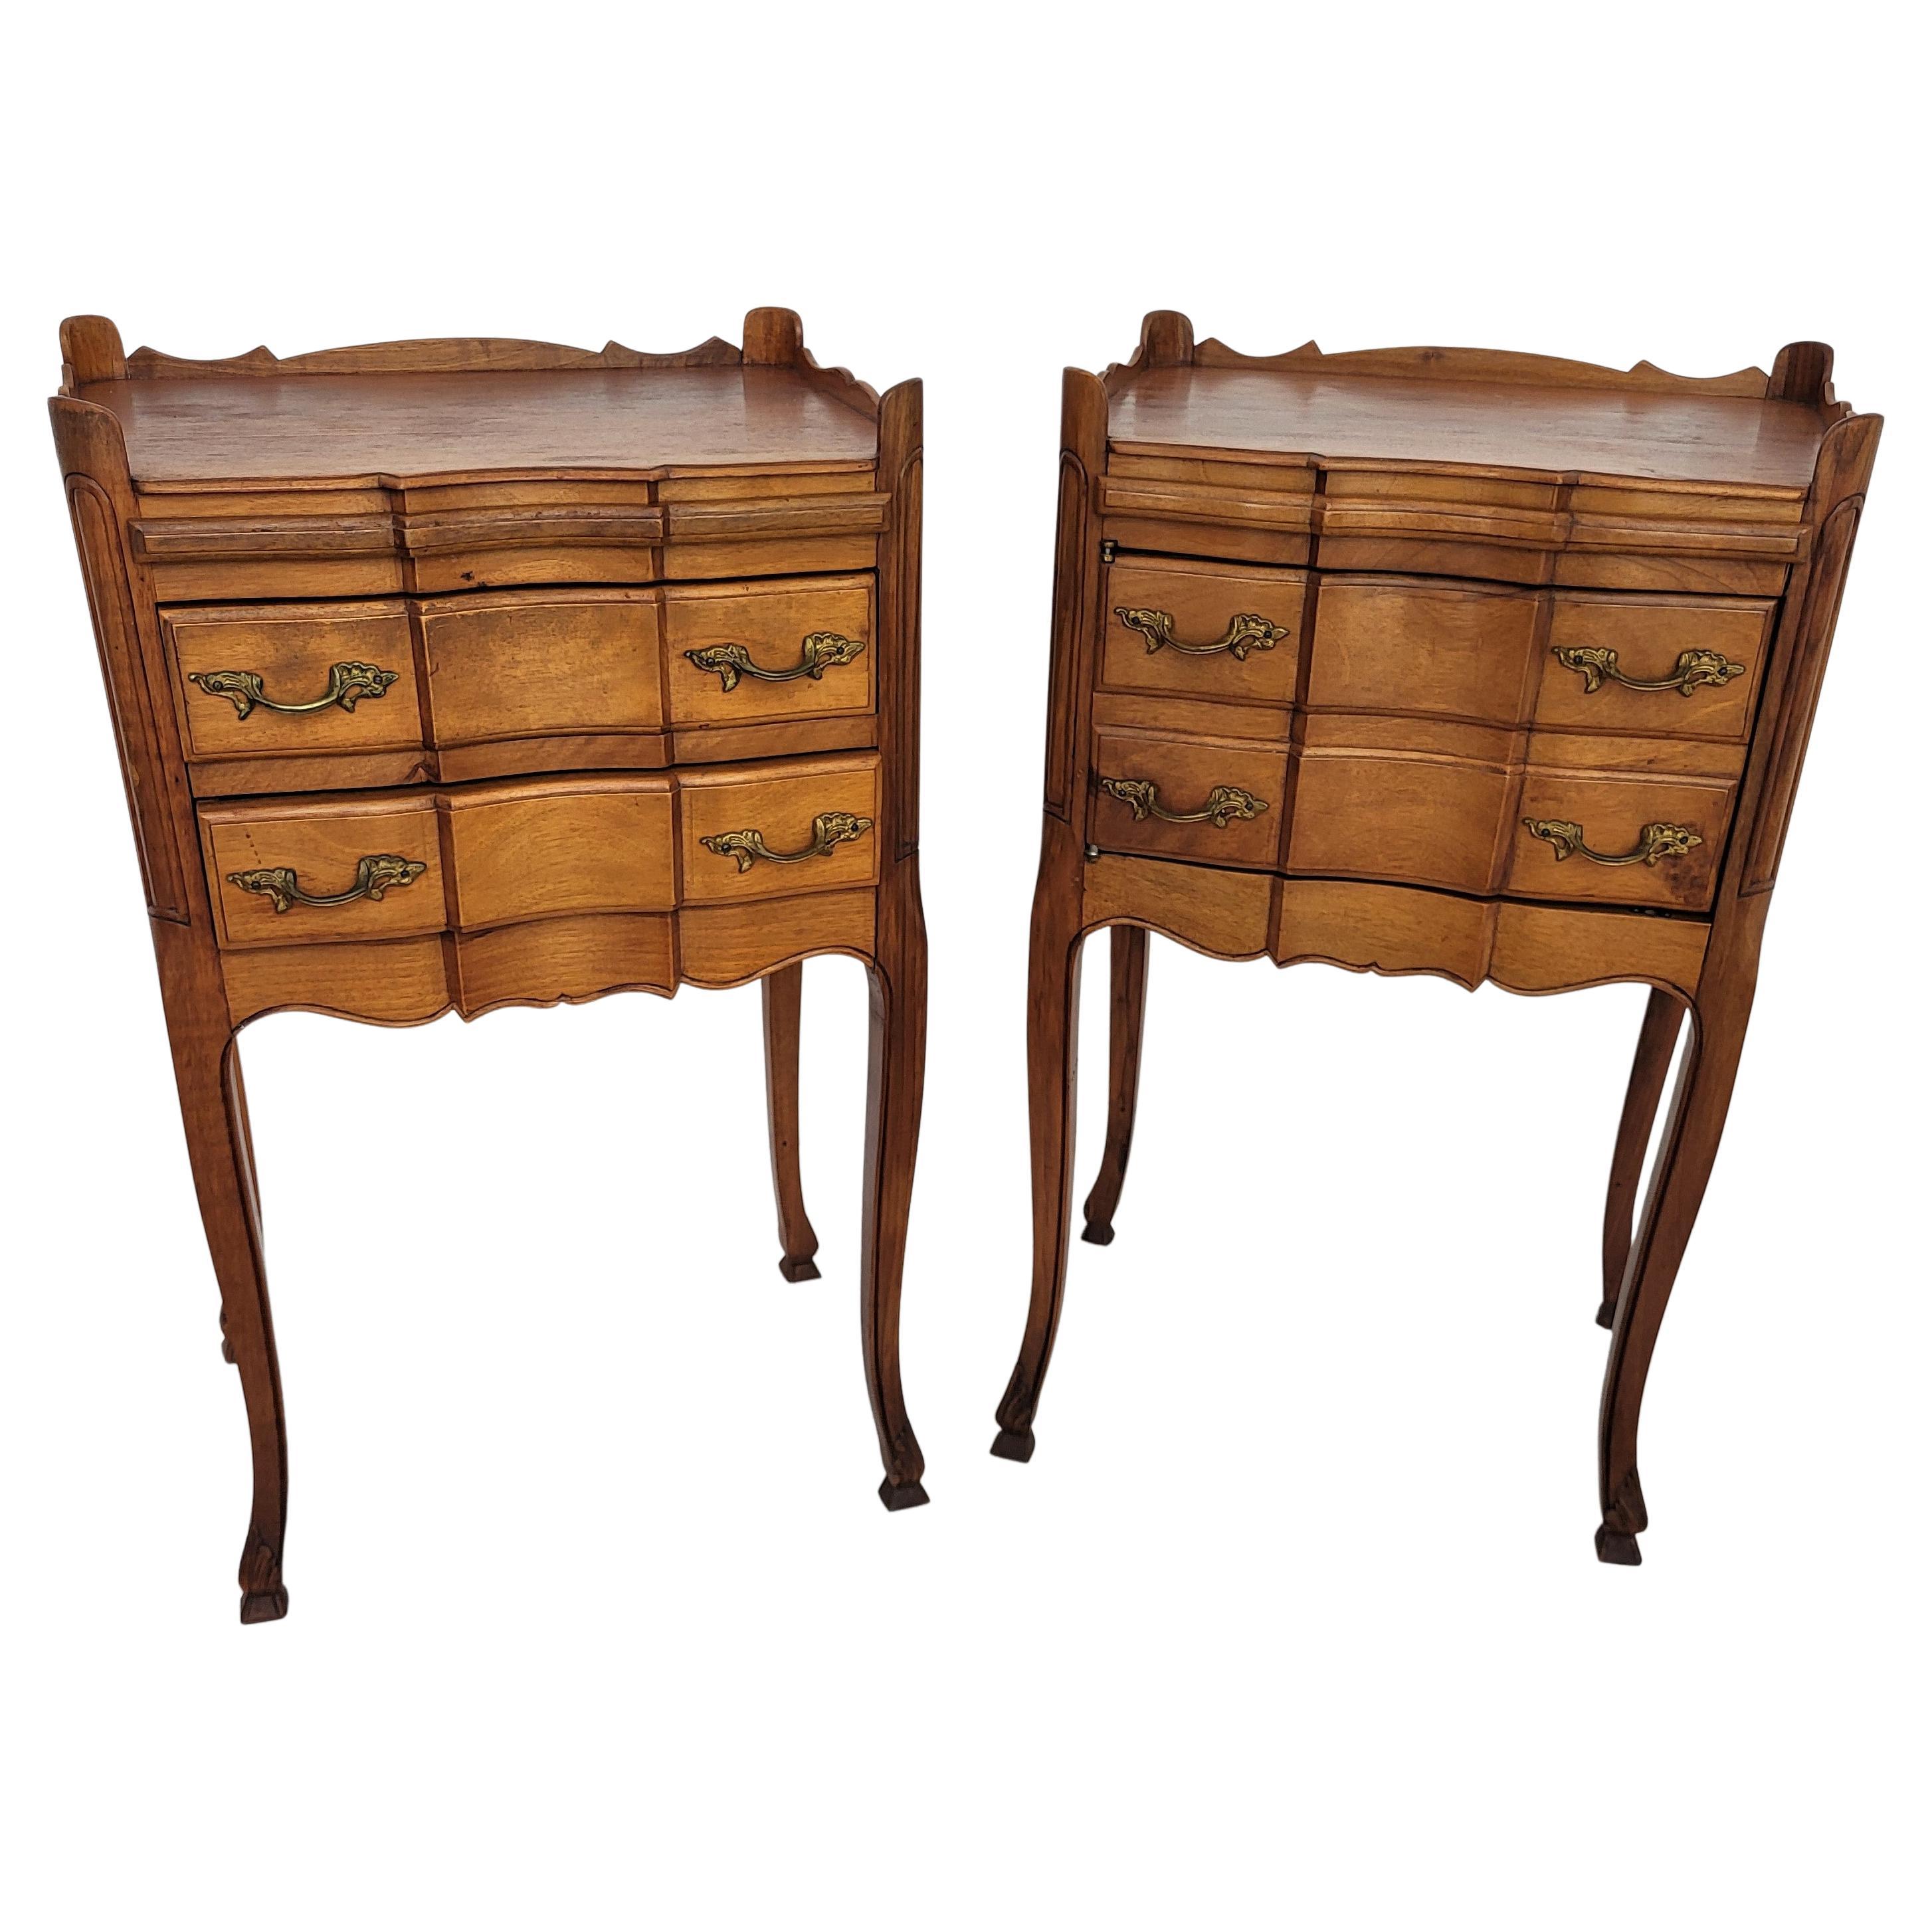 Pair of French Nightstands with Three Drawers and Carbriole Legs